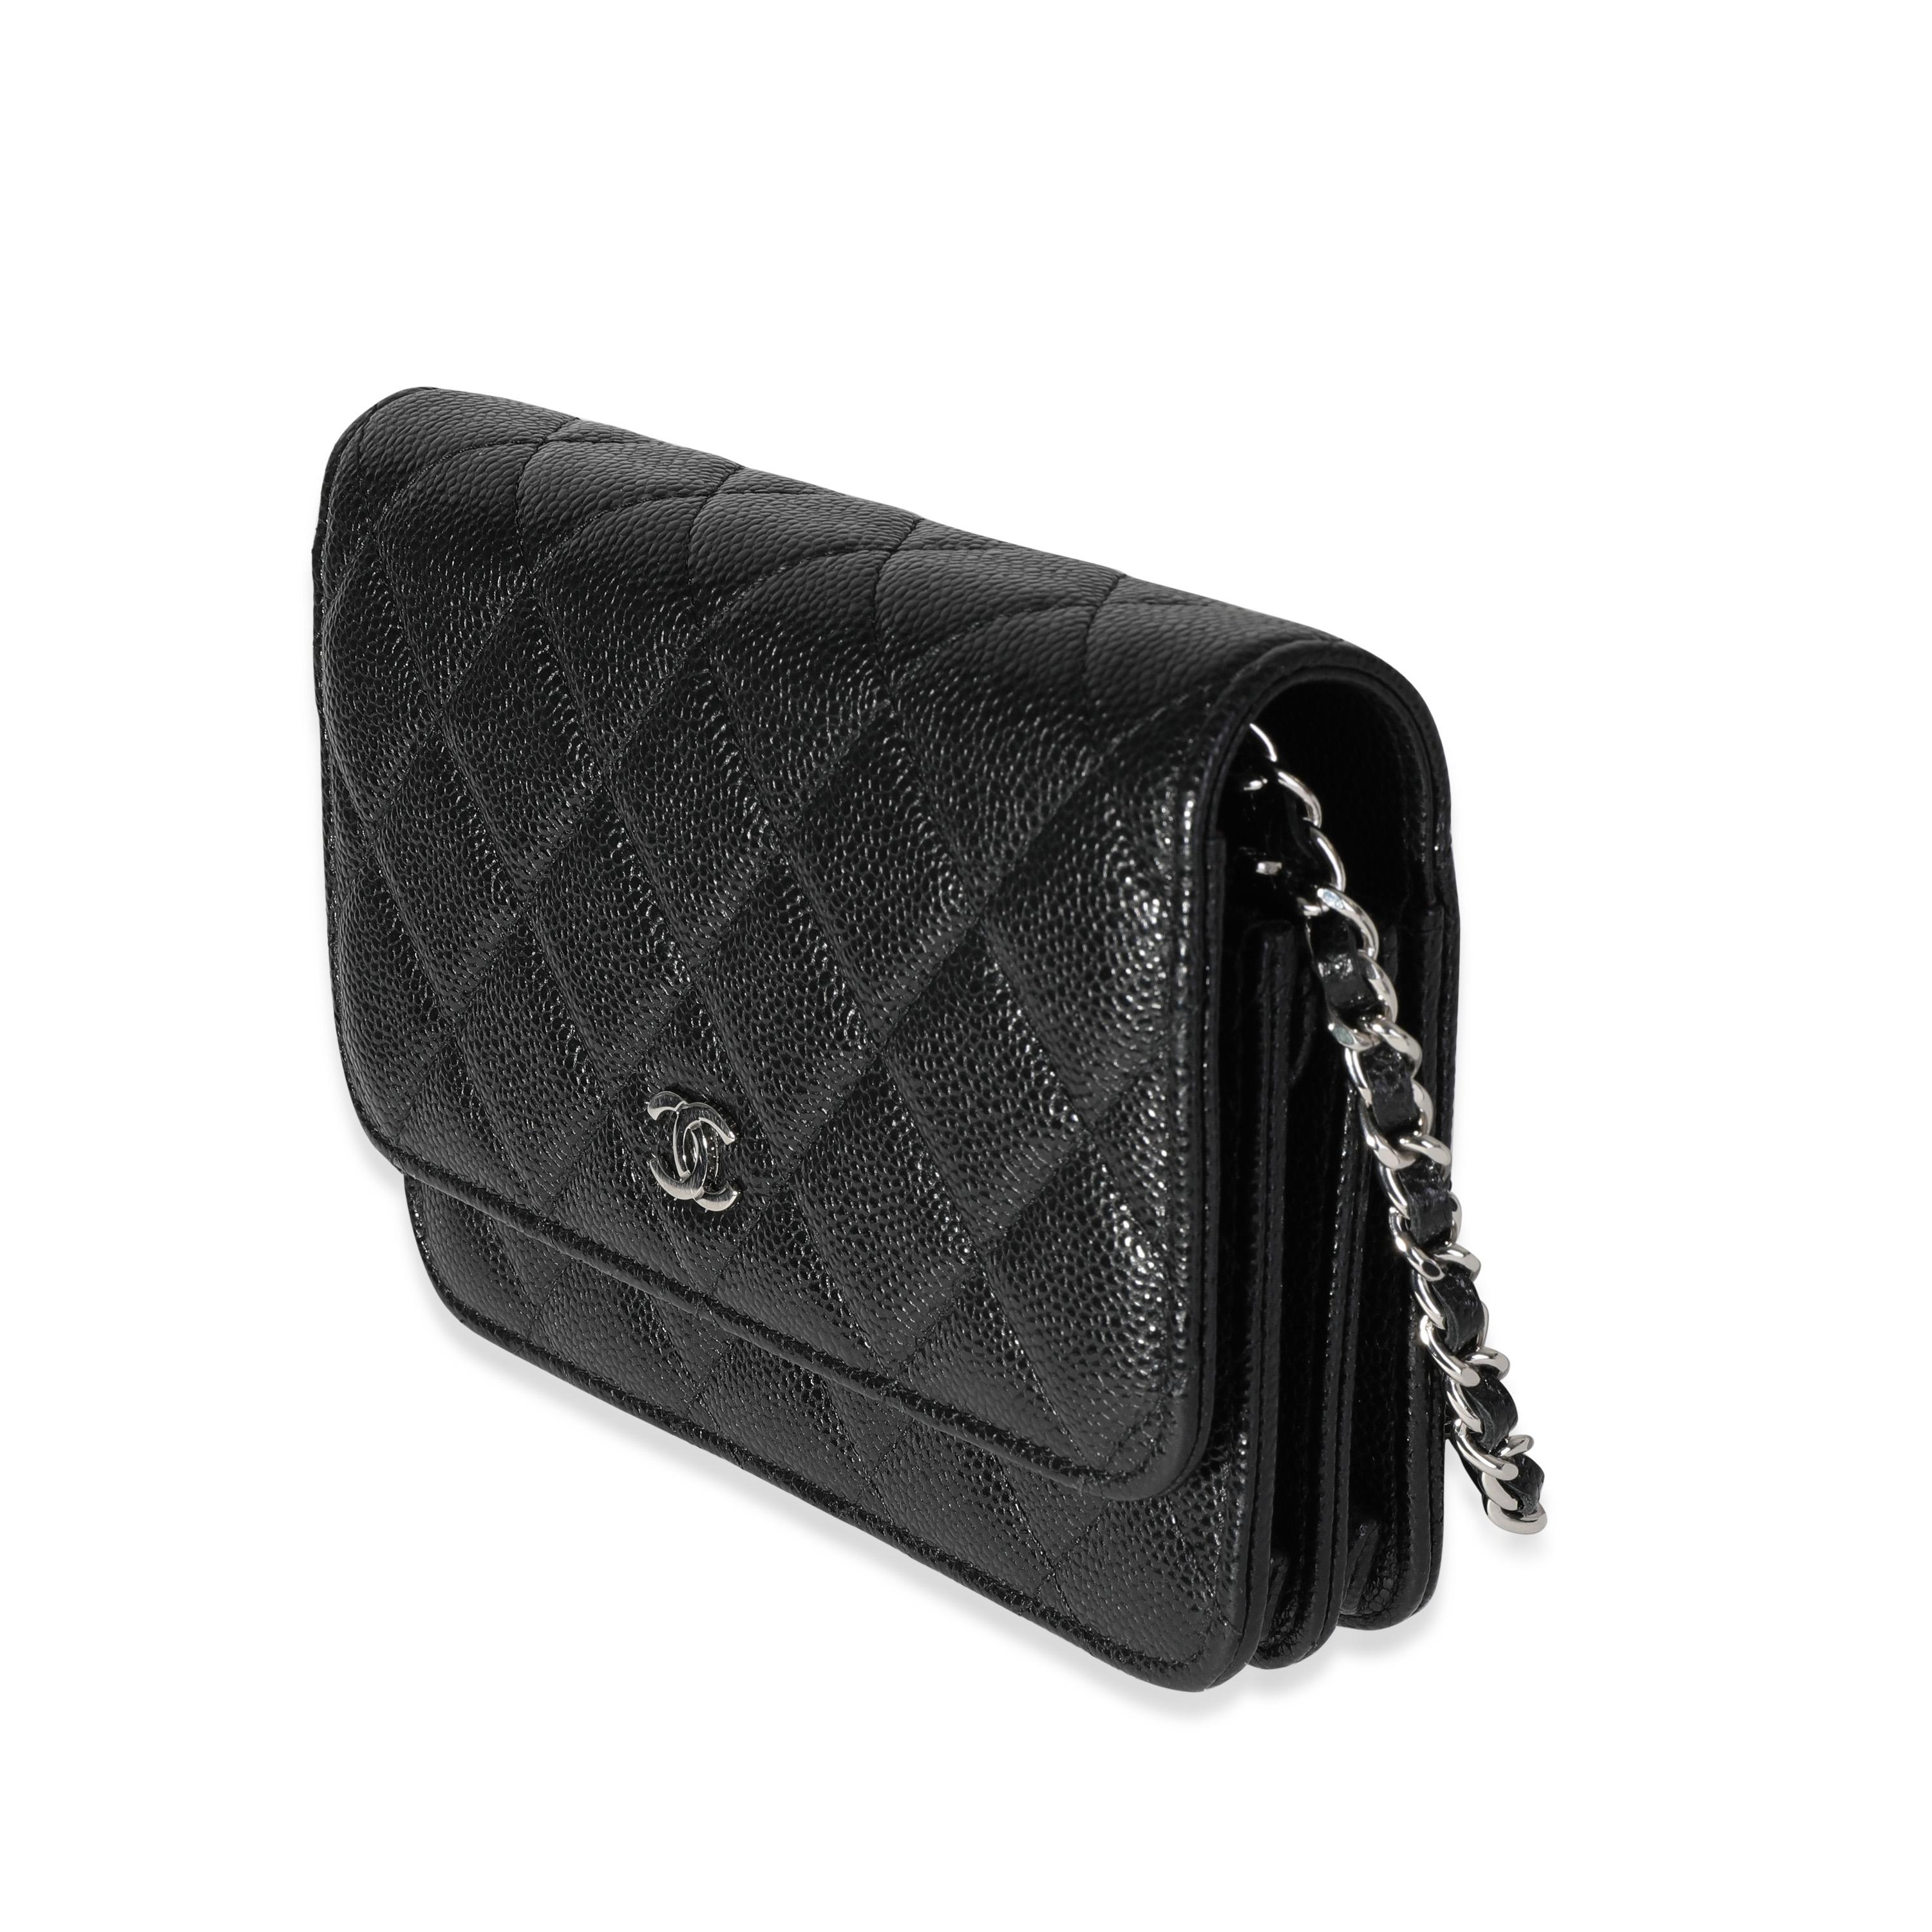 Listing Title: Chanel Black Caviar Quilted Mini Wallet On Chain
SKU: 118559
Condition: Pre-owned (3000)
Handbag Condition: Excellent
Condition Comments: Minor scratches at hardware.
Brand: Chanel
Model: Chanel Black Caviar Quilted Mini Wallet On